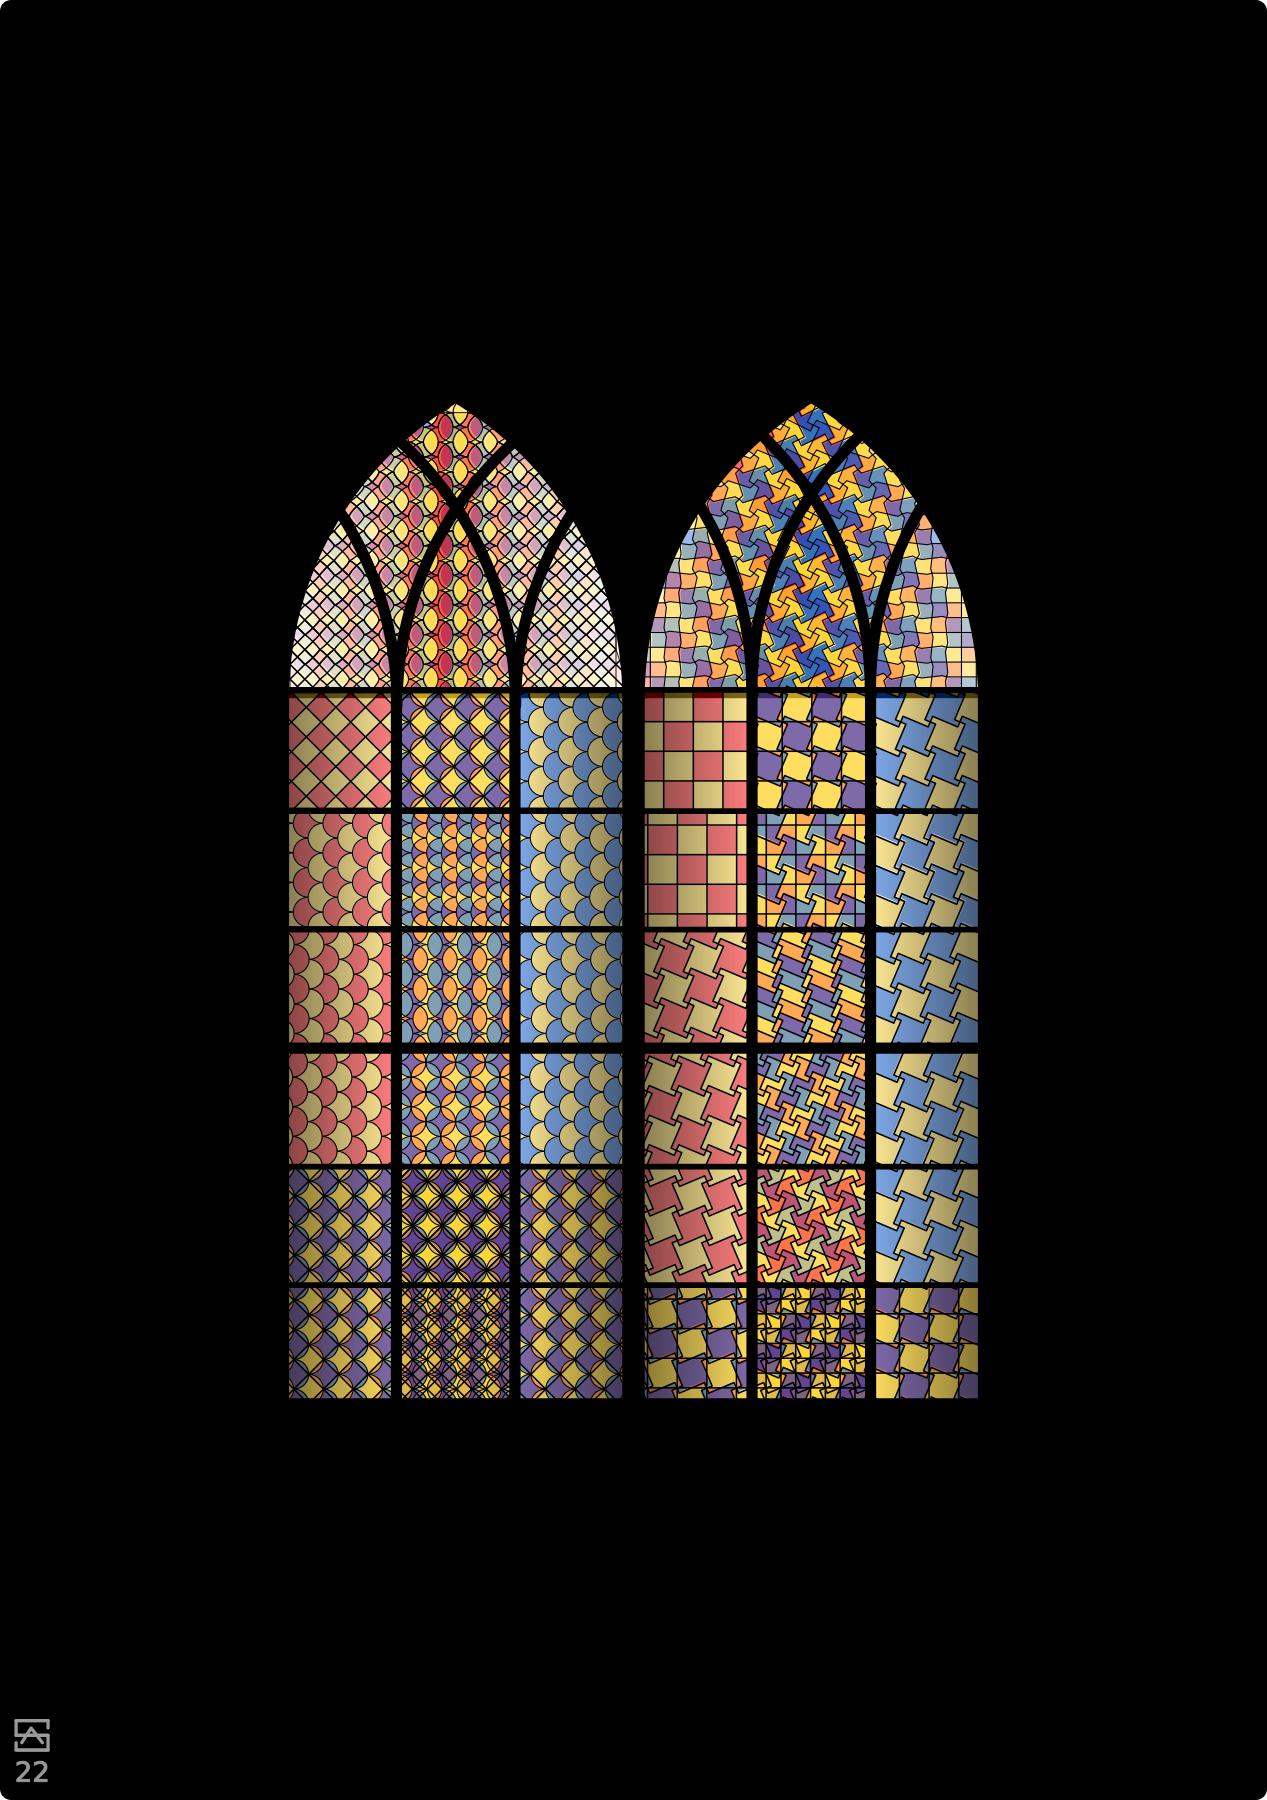 Image for entry 'The Large Stained Glass Windows'